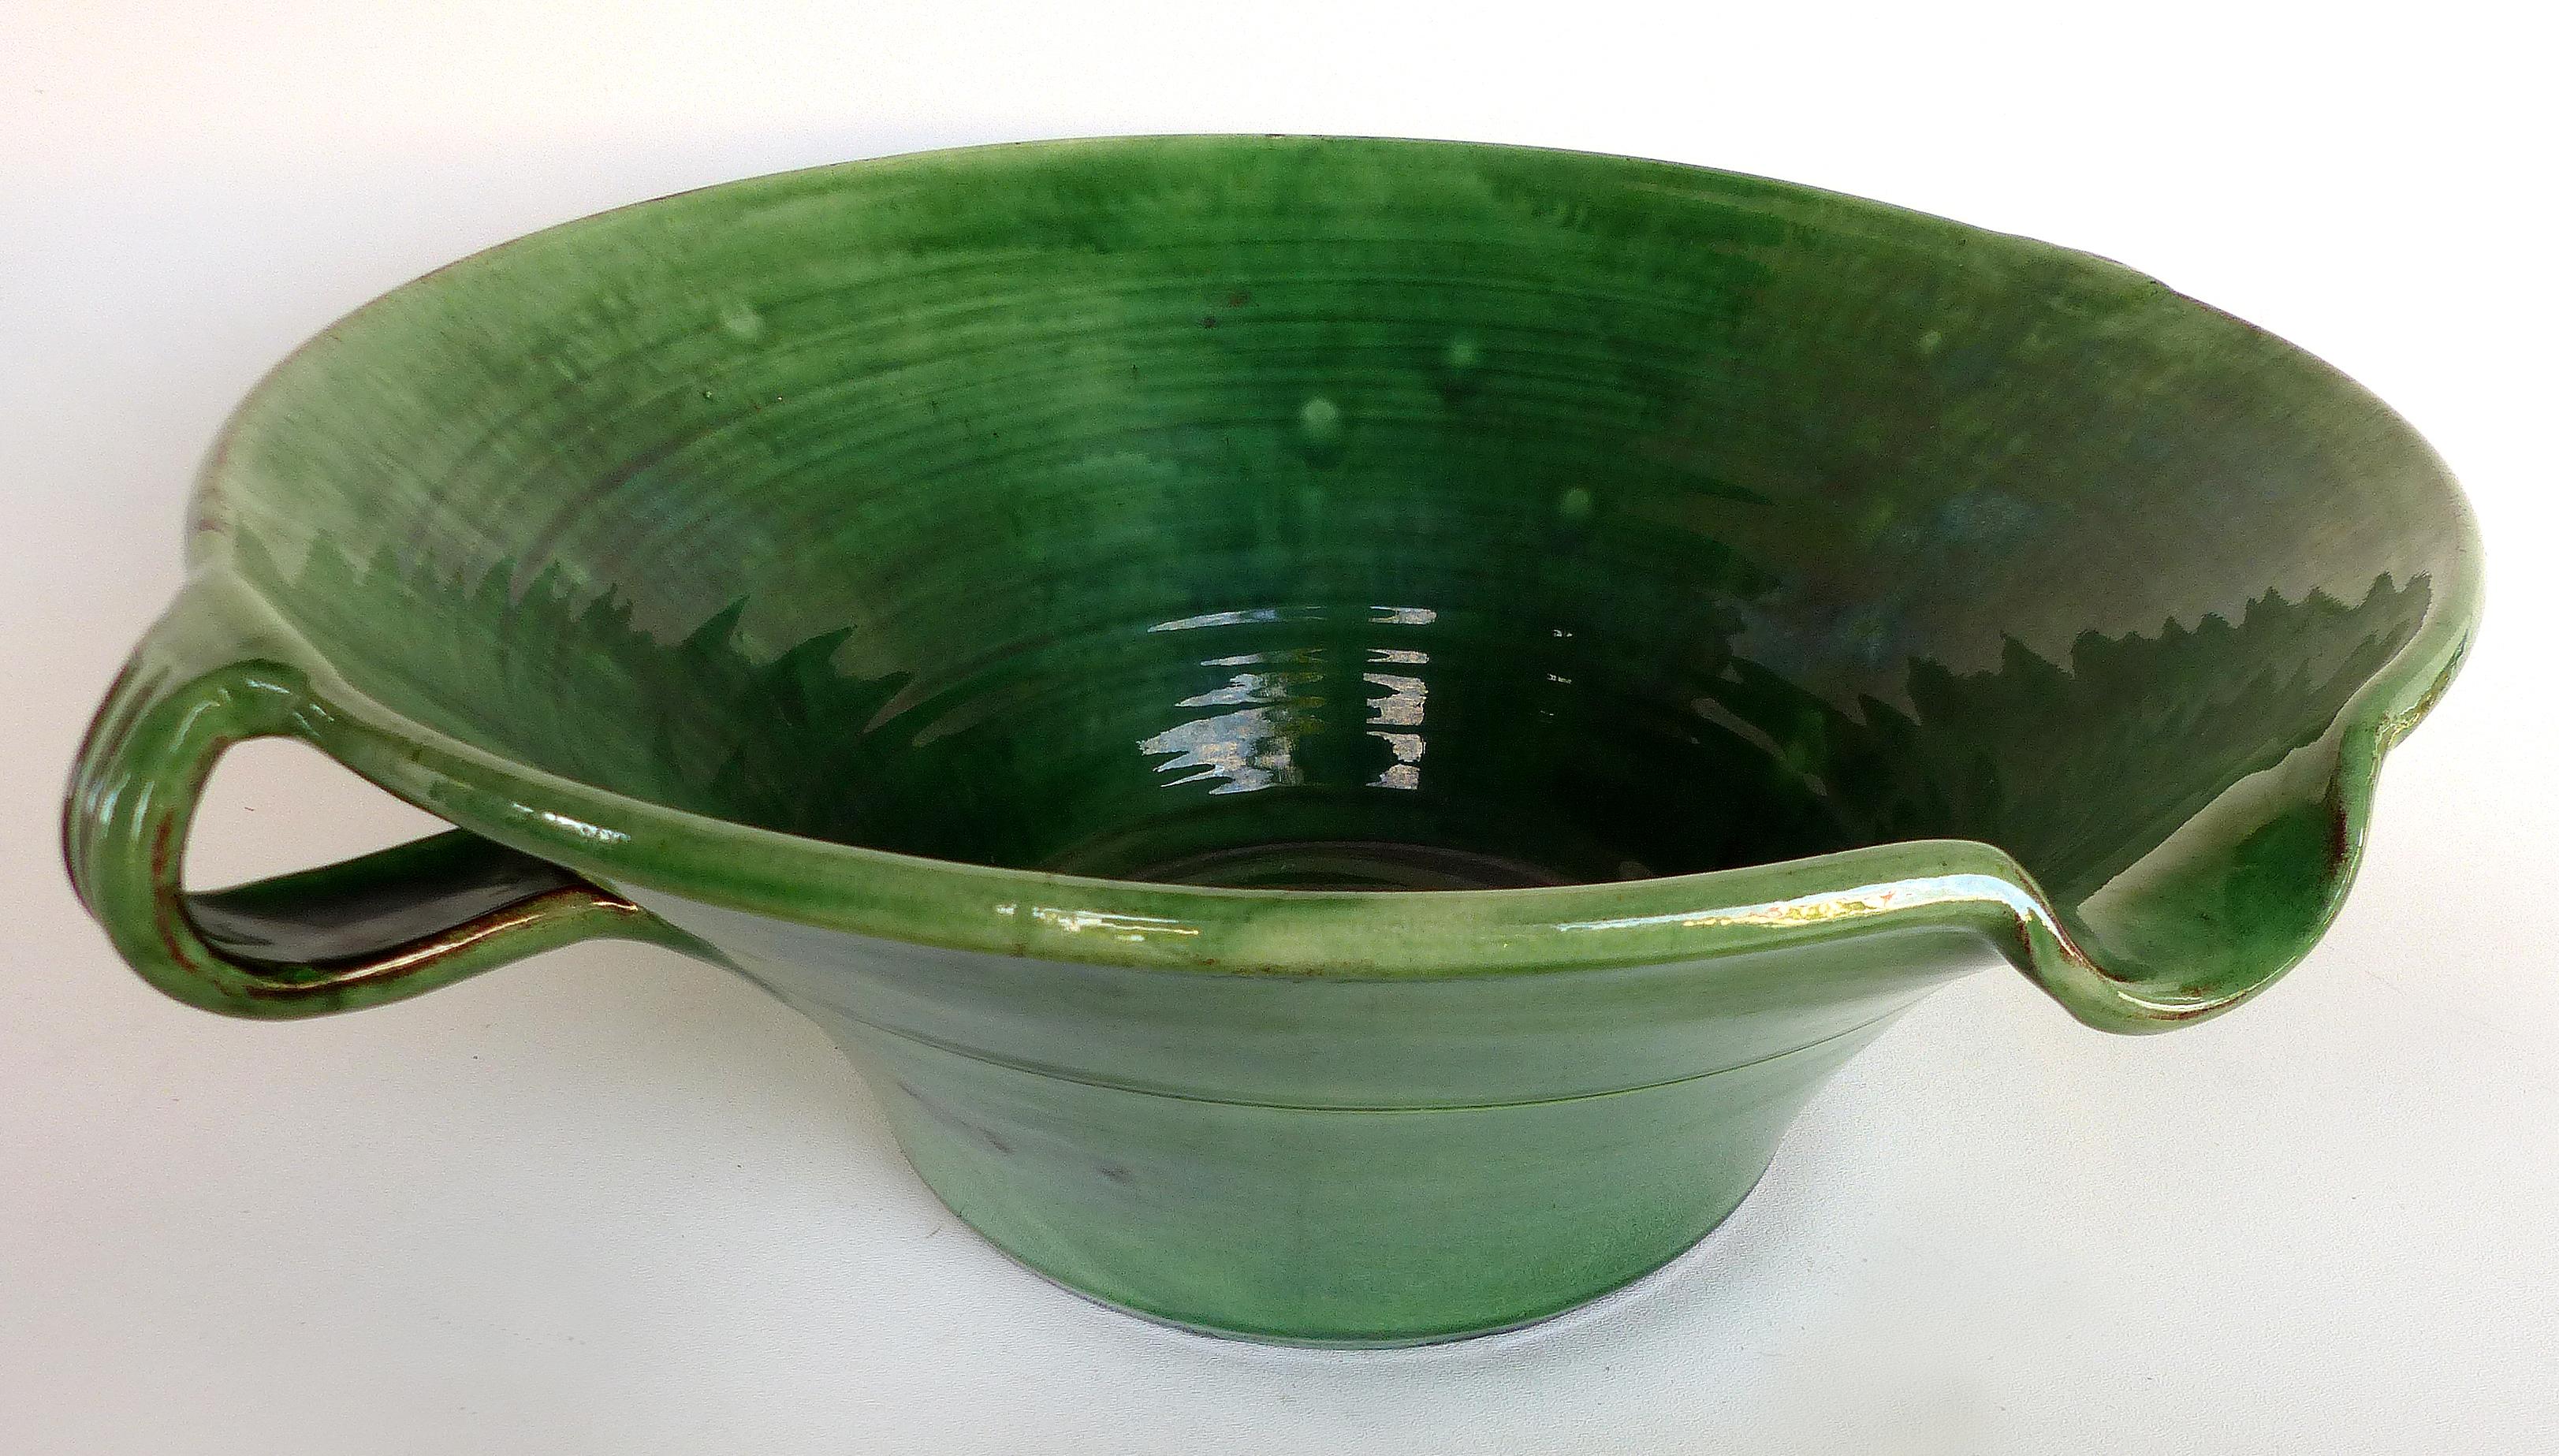 Large Green Glazed French Terracotta Two Handled Vessel with Spout

Offered for sale is a large French glazed green terracotta vessel that was created as a mixing bowl with a pouring spout. The bowl will make a lovely centerpiece for a rustic table